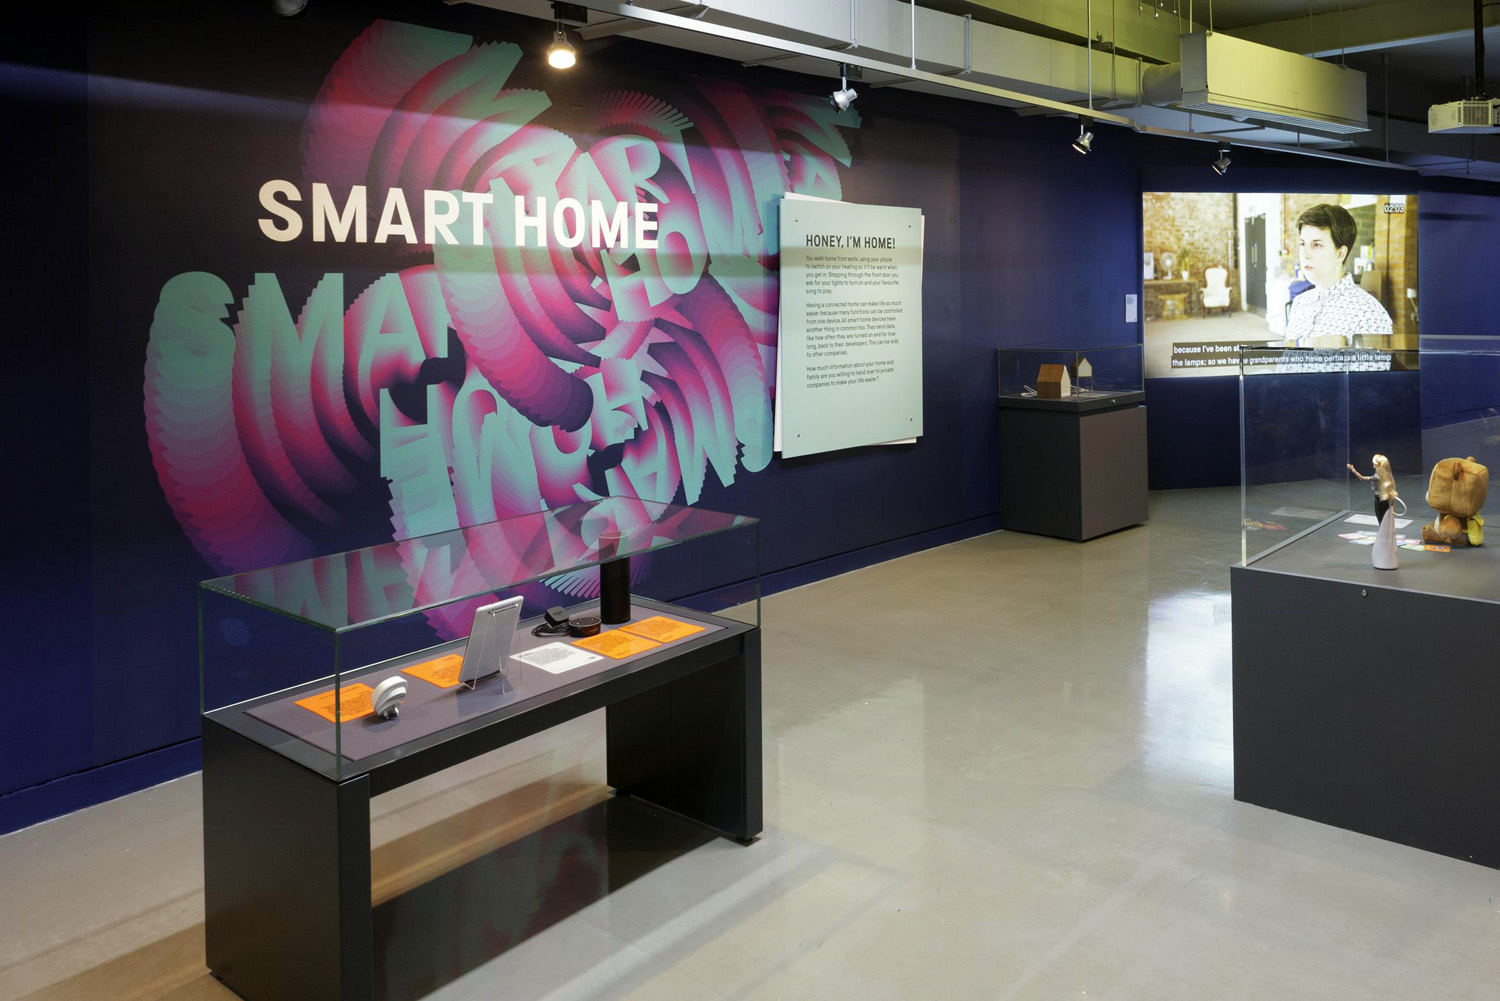 'Smart Home' section of Never Alone exhibition with internet connected devices on display